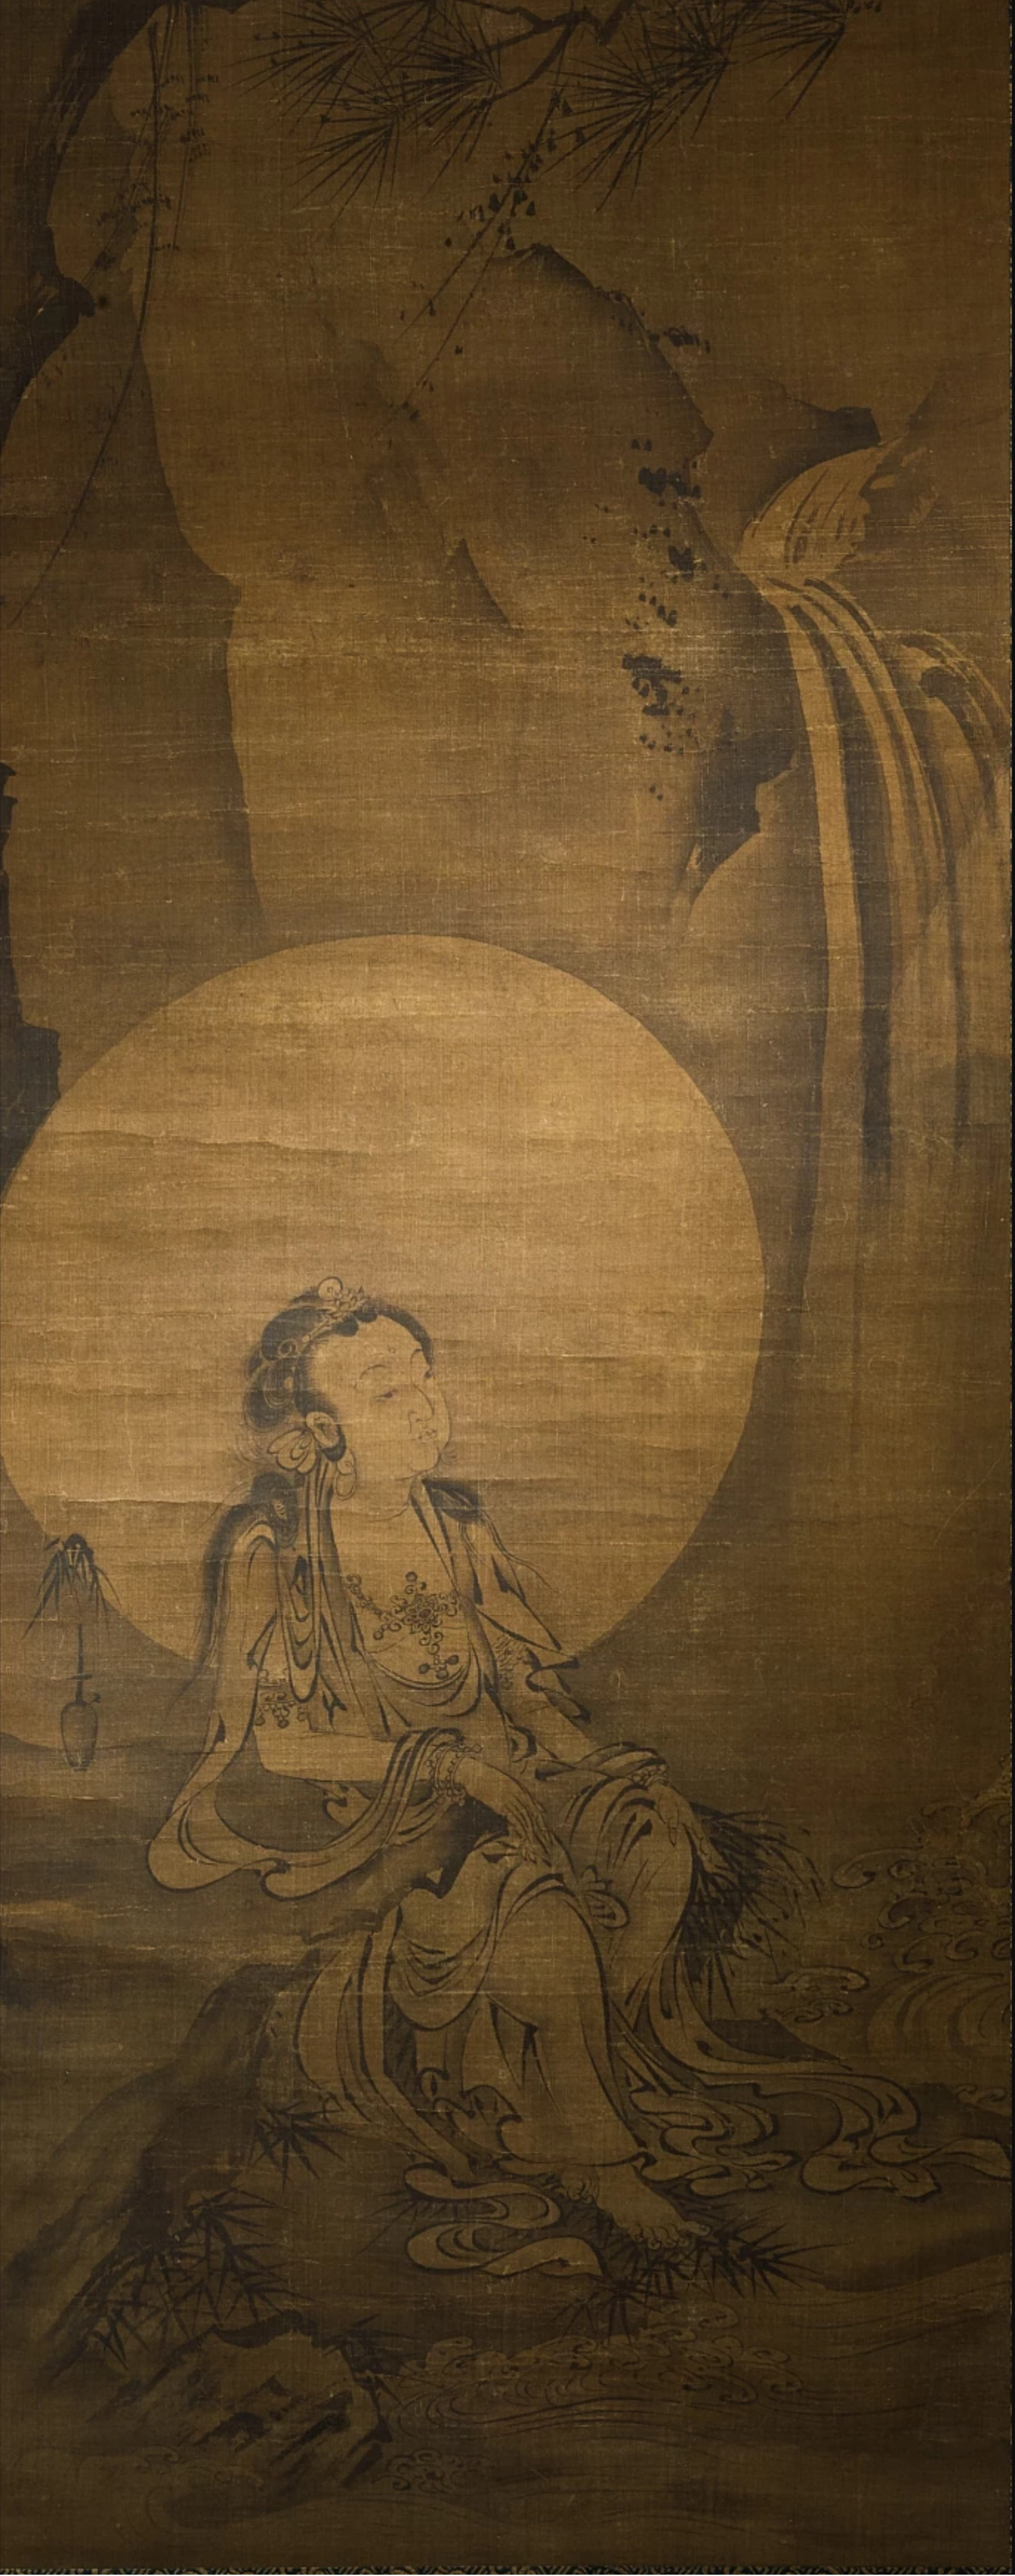 FIG. 1 ANONYMOUS, A PAINTING OF A BODHISATTVA AVALOKITESHVARA, SONG - YUAN DYNASTY, INK ON SILK, HANGING SCROLL, 124 BY 48.8 CM SOTHEBY'S HONG KONG, 6TH OCTOBER 2019, LOT 2569 圖一 宋至元　佚名《水月觀音》軸　絹本水墨 124 X 48.8 公分 香港蘇富比2019年10月6日，編號2569